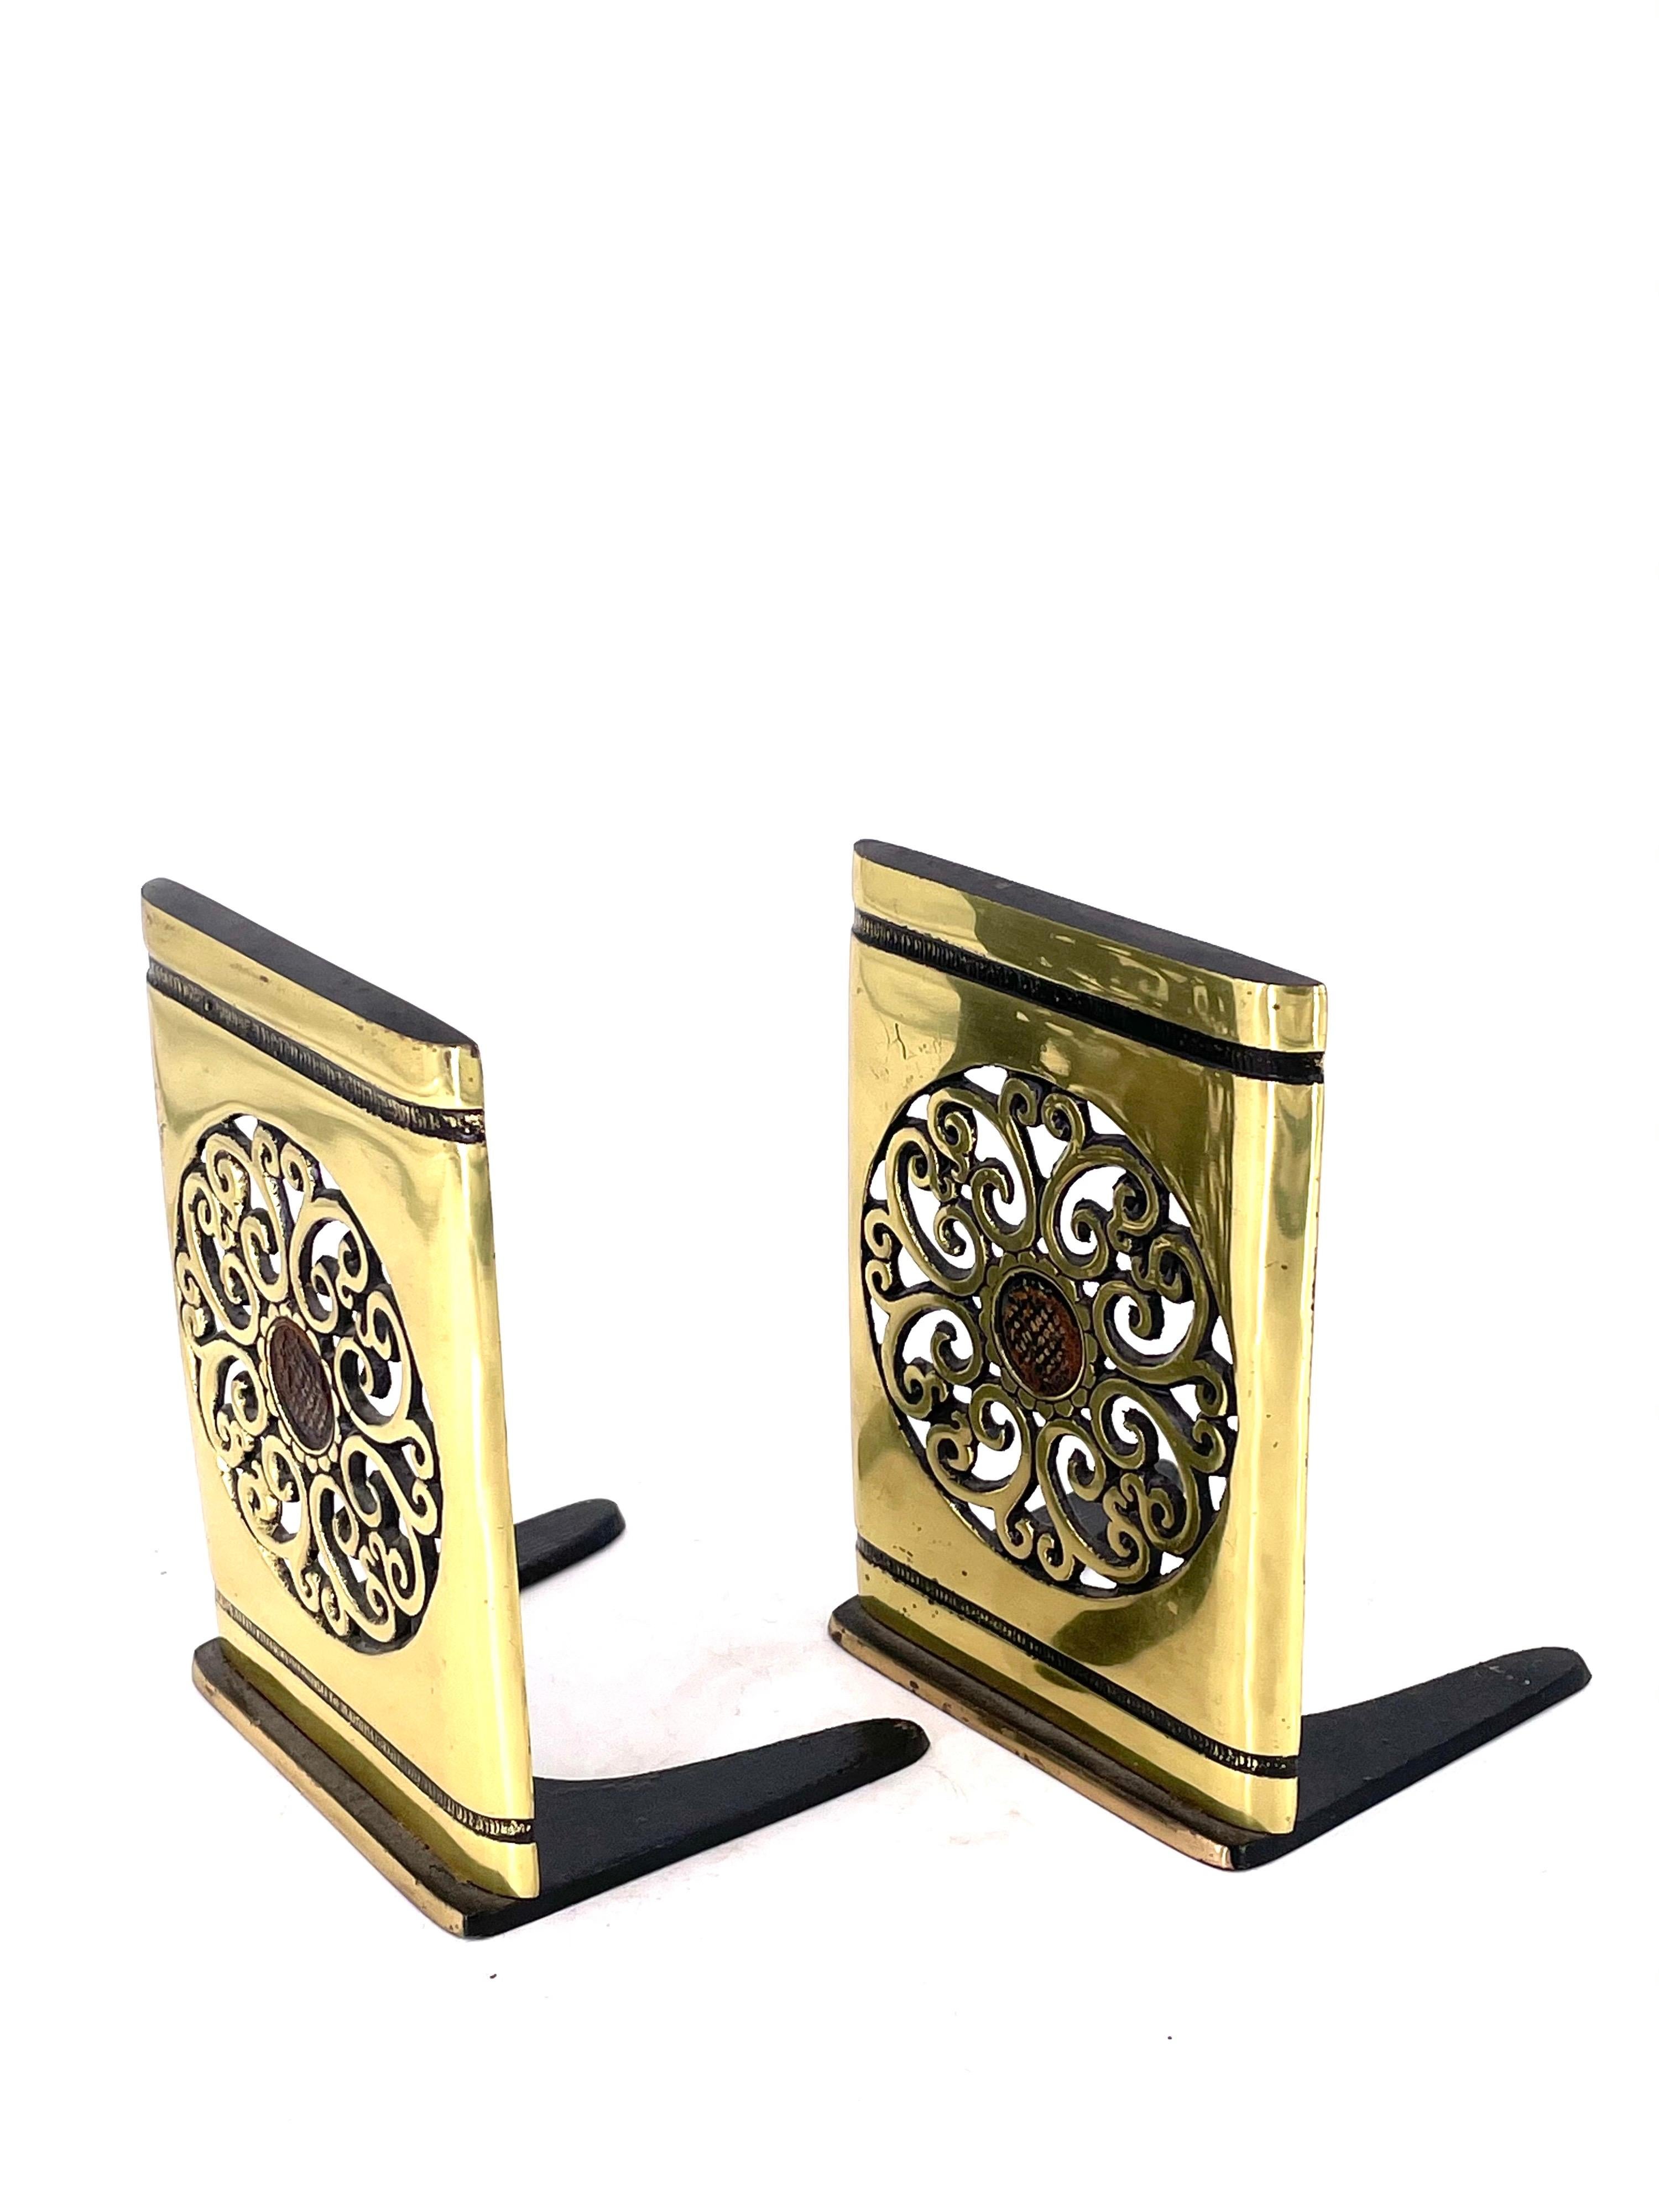 Hollywood Regency Pair of Decorative Brass Bookends Made in Israel